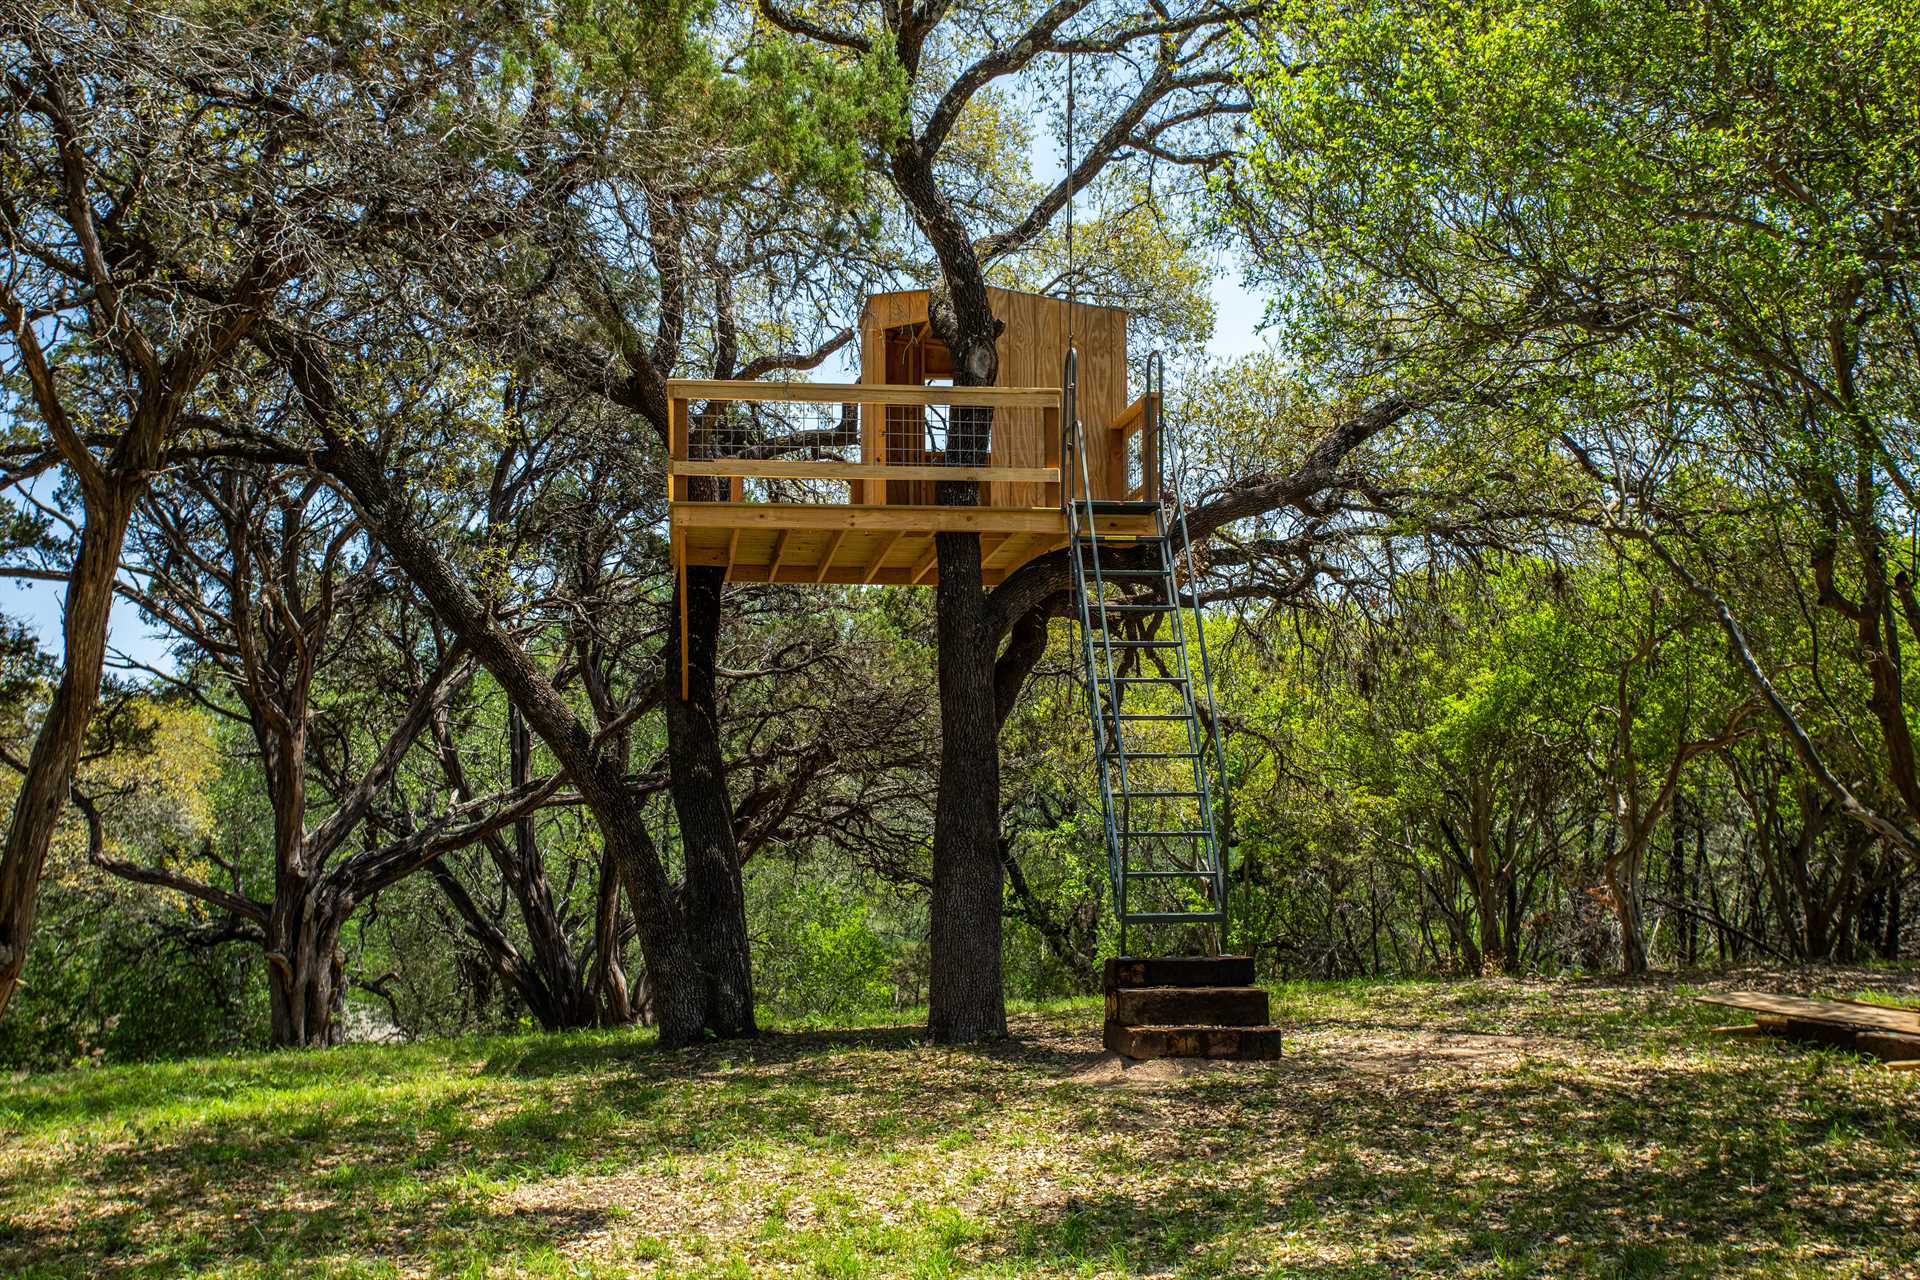                                                 The custom treehouse has a sheltered lookout, where you can enjoy an elevated view of the surrounding Hill Country!